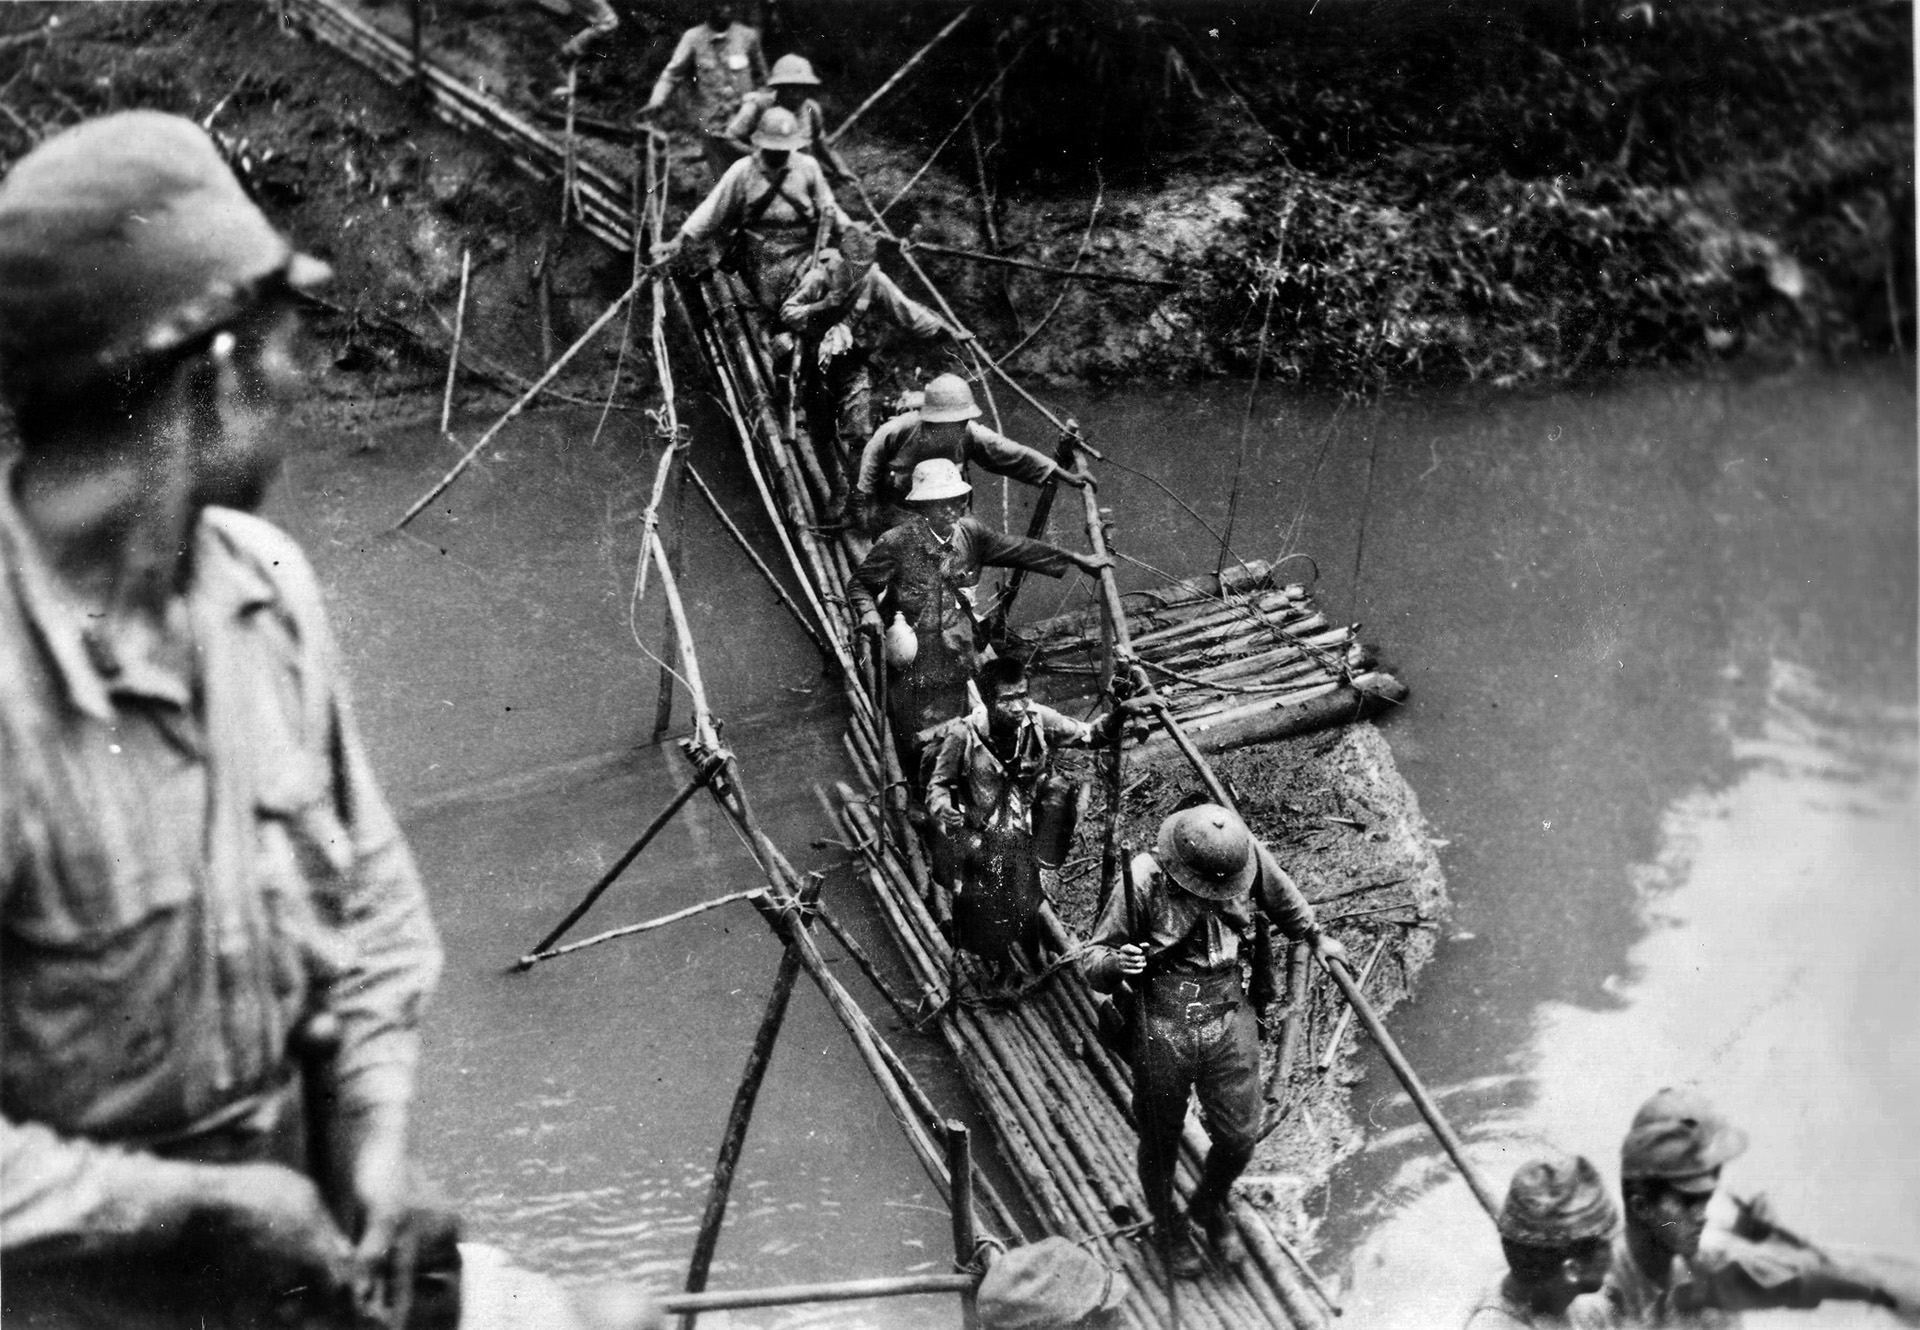 Japanese troops cross a river in Burma via an unsteady bridge. The Japanese were well trained in jungle fighting and withstood the privations of harsh conditions during their advance in Burma. 